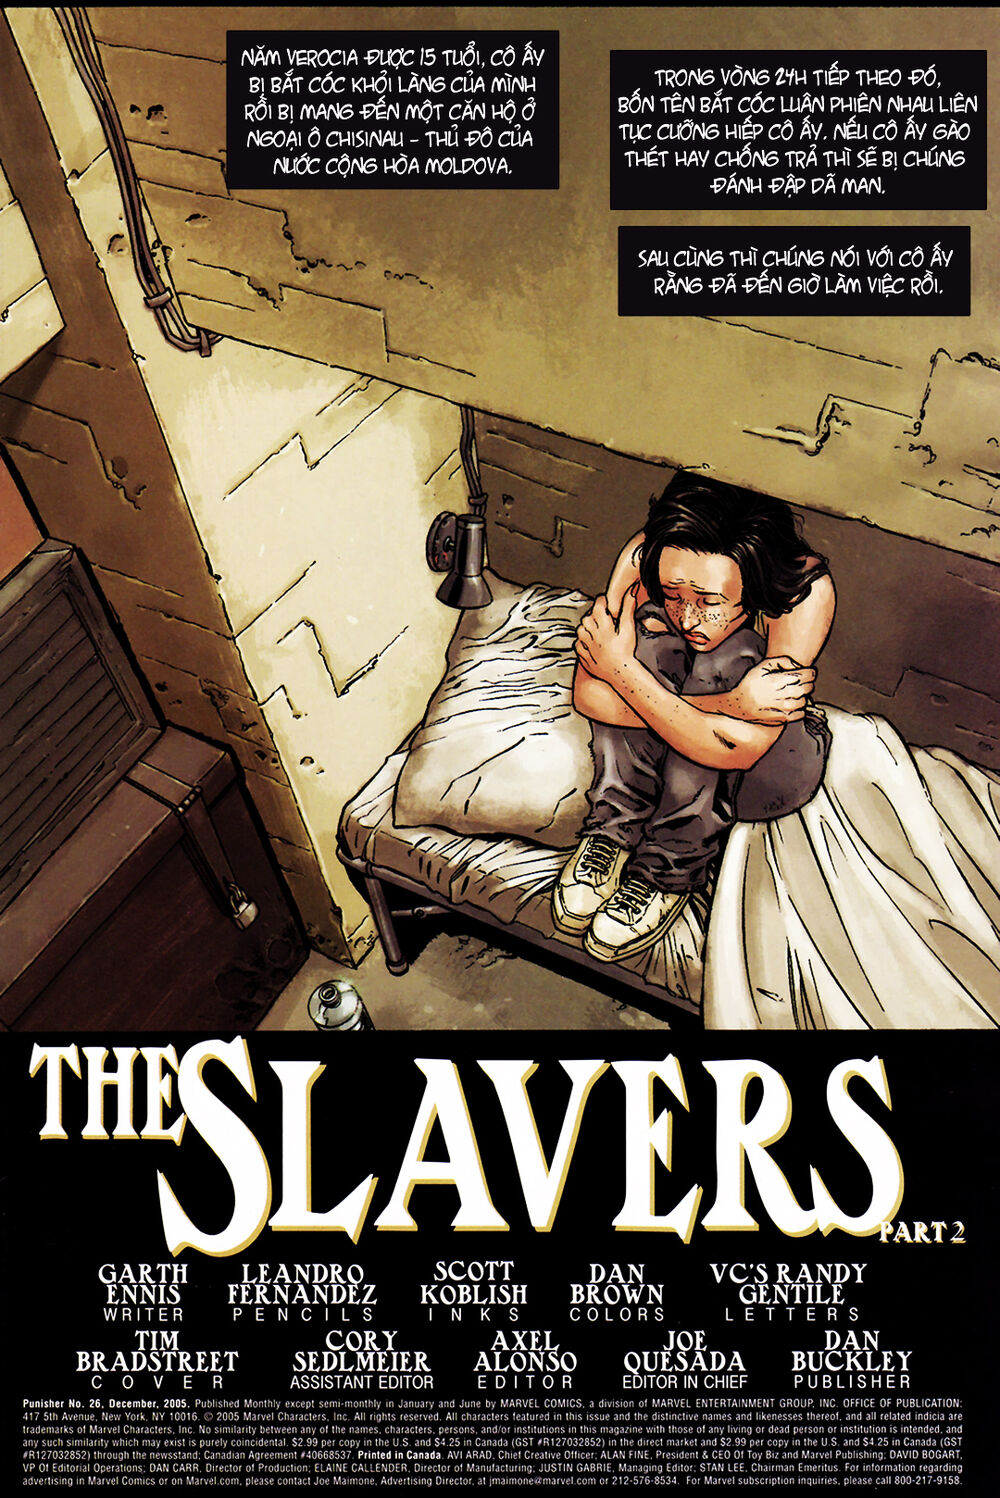 Truyện khủng - The Punisher: The Slavers